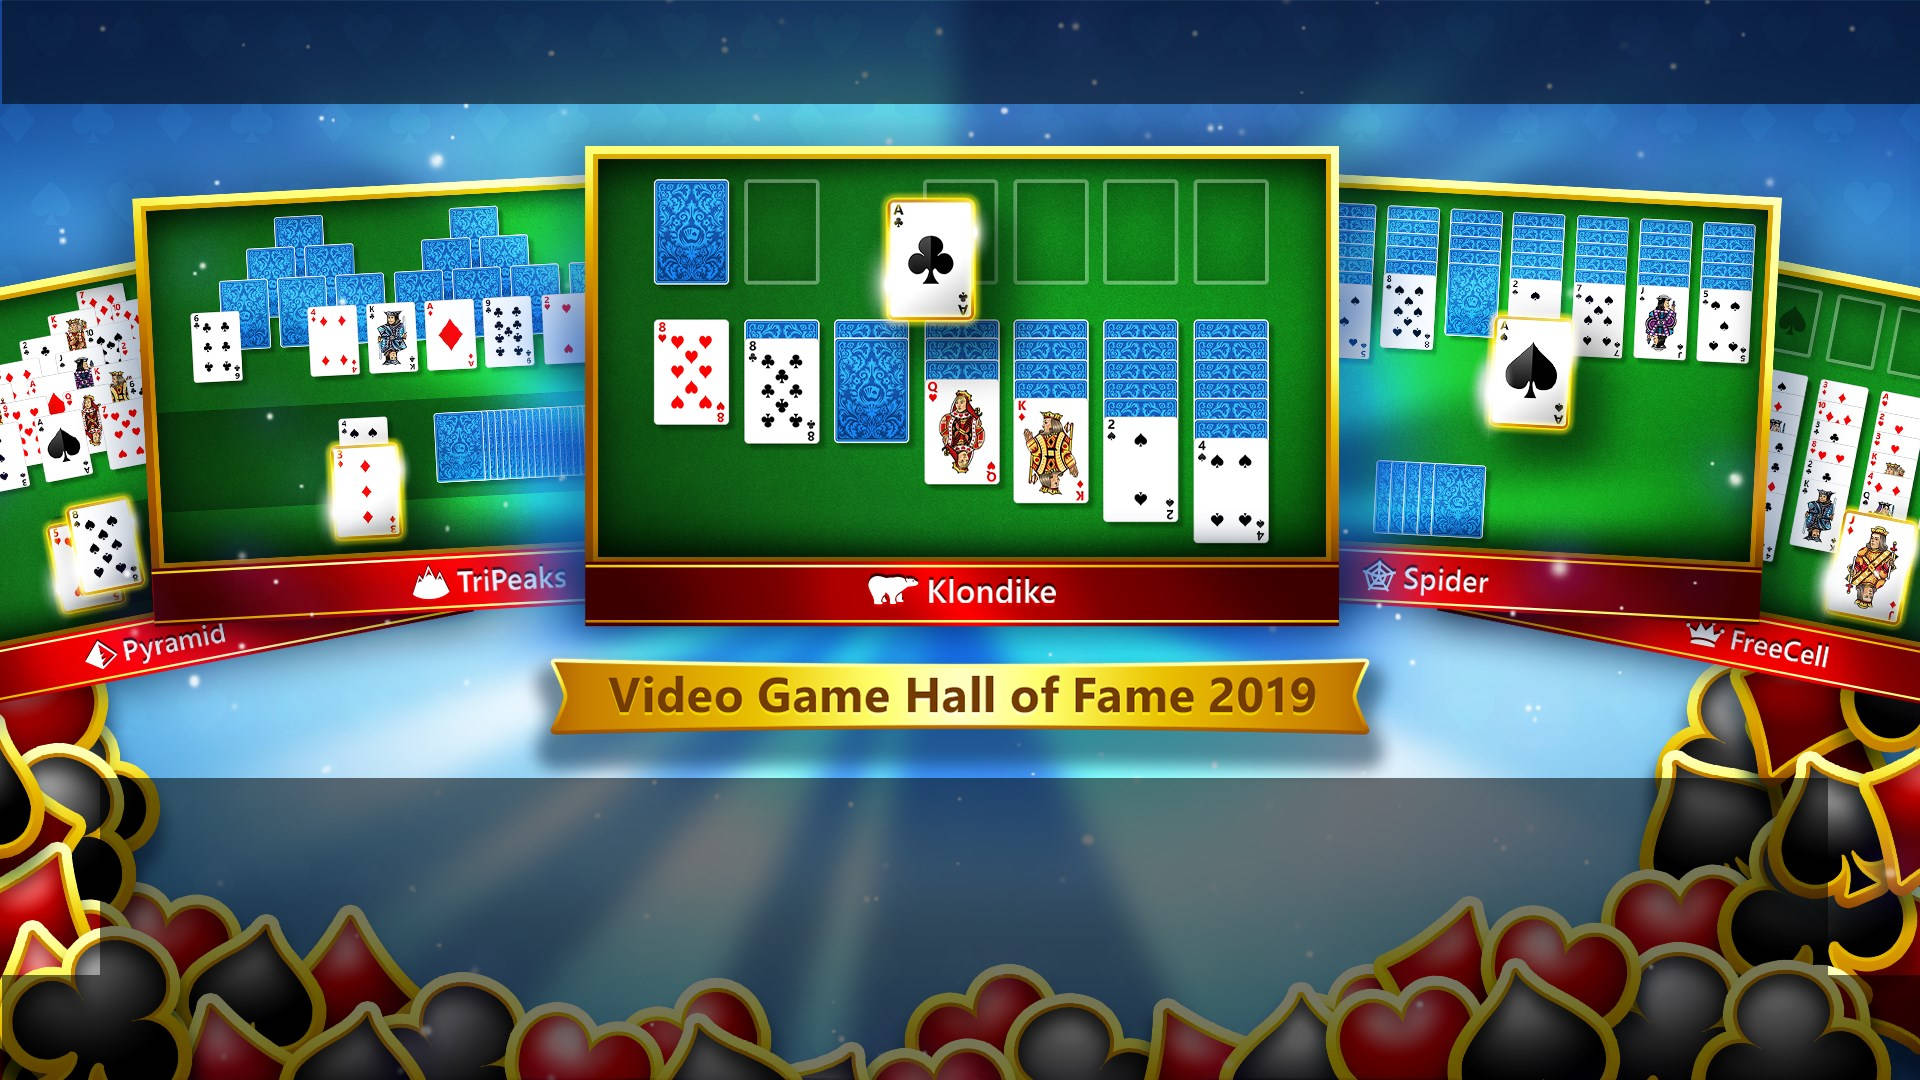 Microsoft Solitaire Spelens Hall Of Fame 2019. Wallpaper